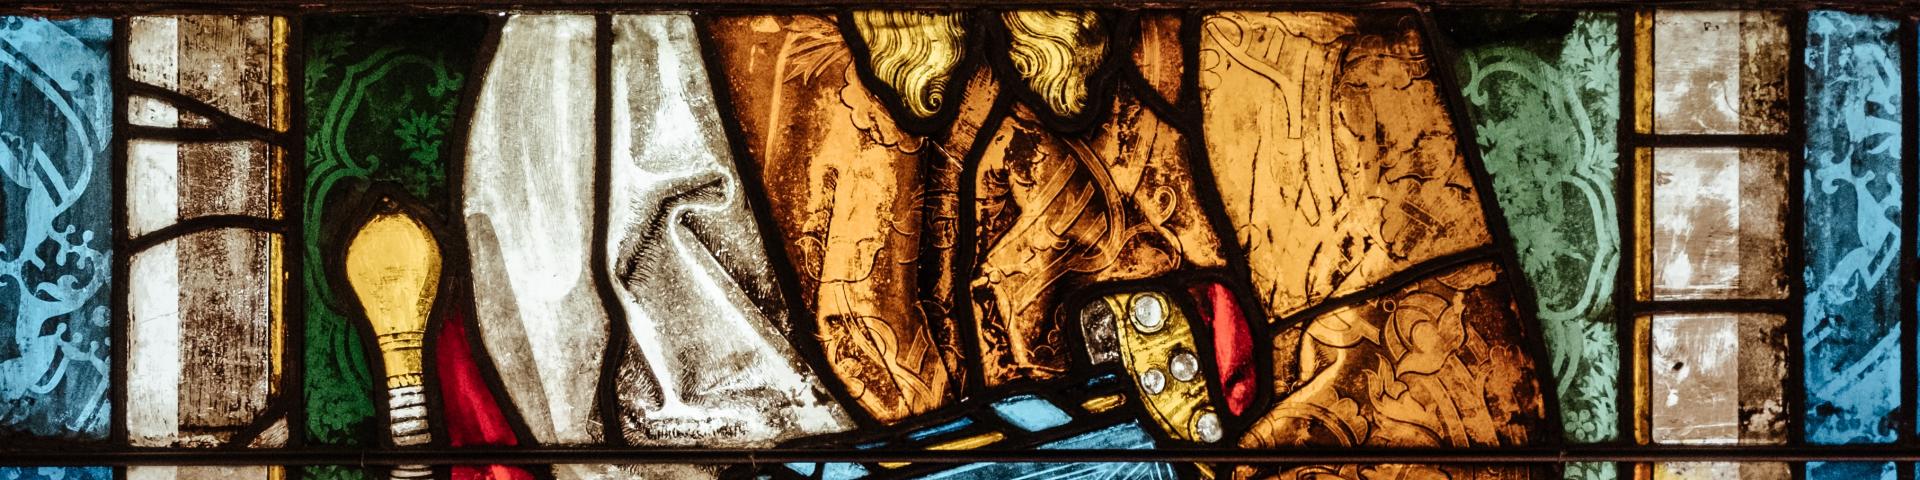 close-up of a stained glass window: a man holding a book